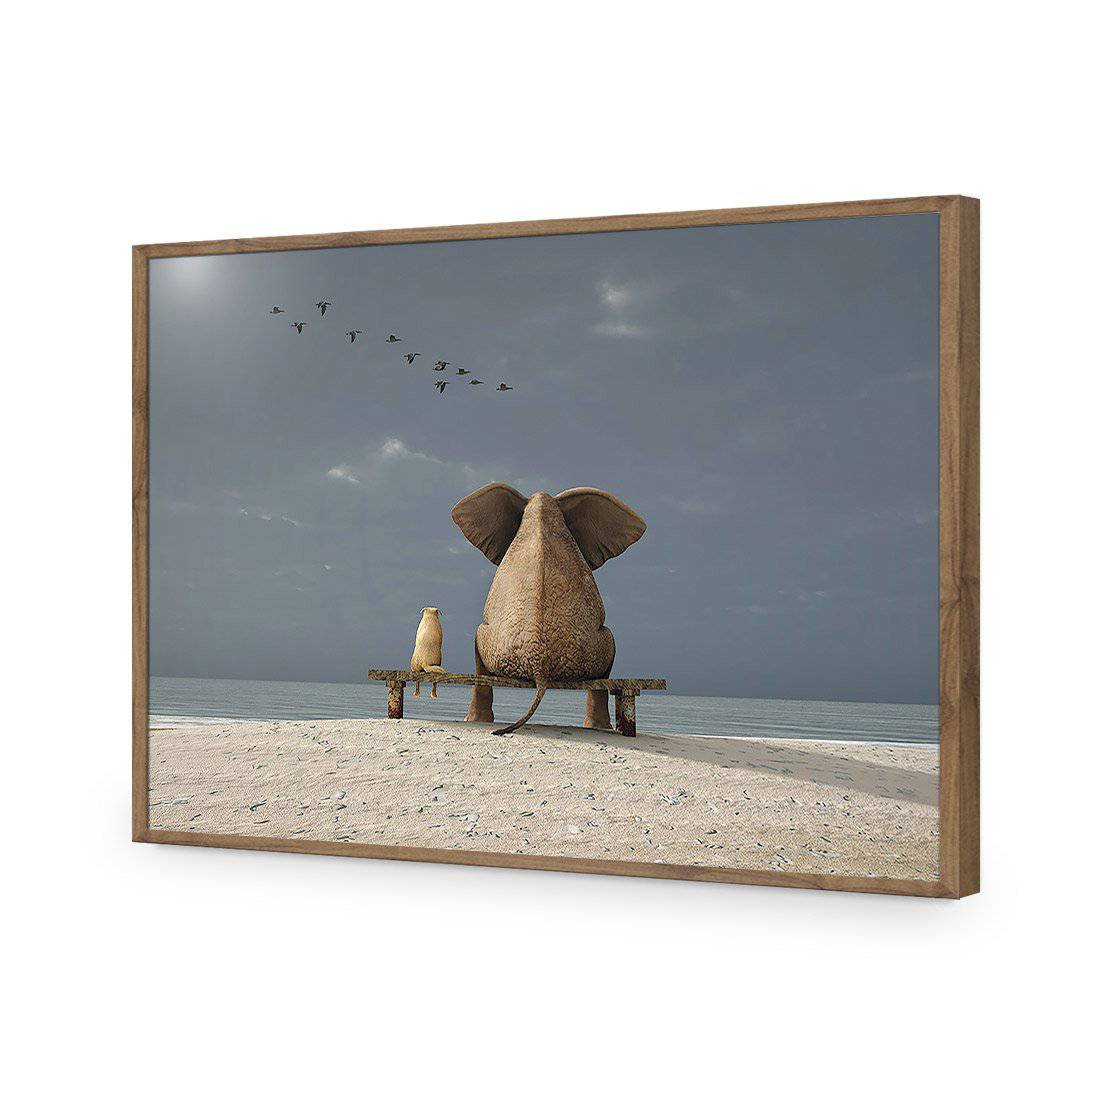 Little And Large-Acrylic-Wall Art Design-Without Border-Acrylic - Natural Frame-45x30cm-Wall Art Designs